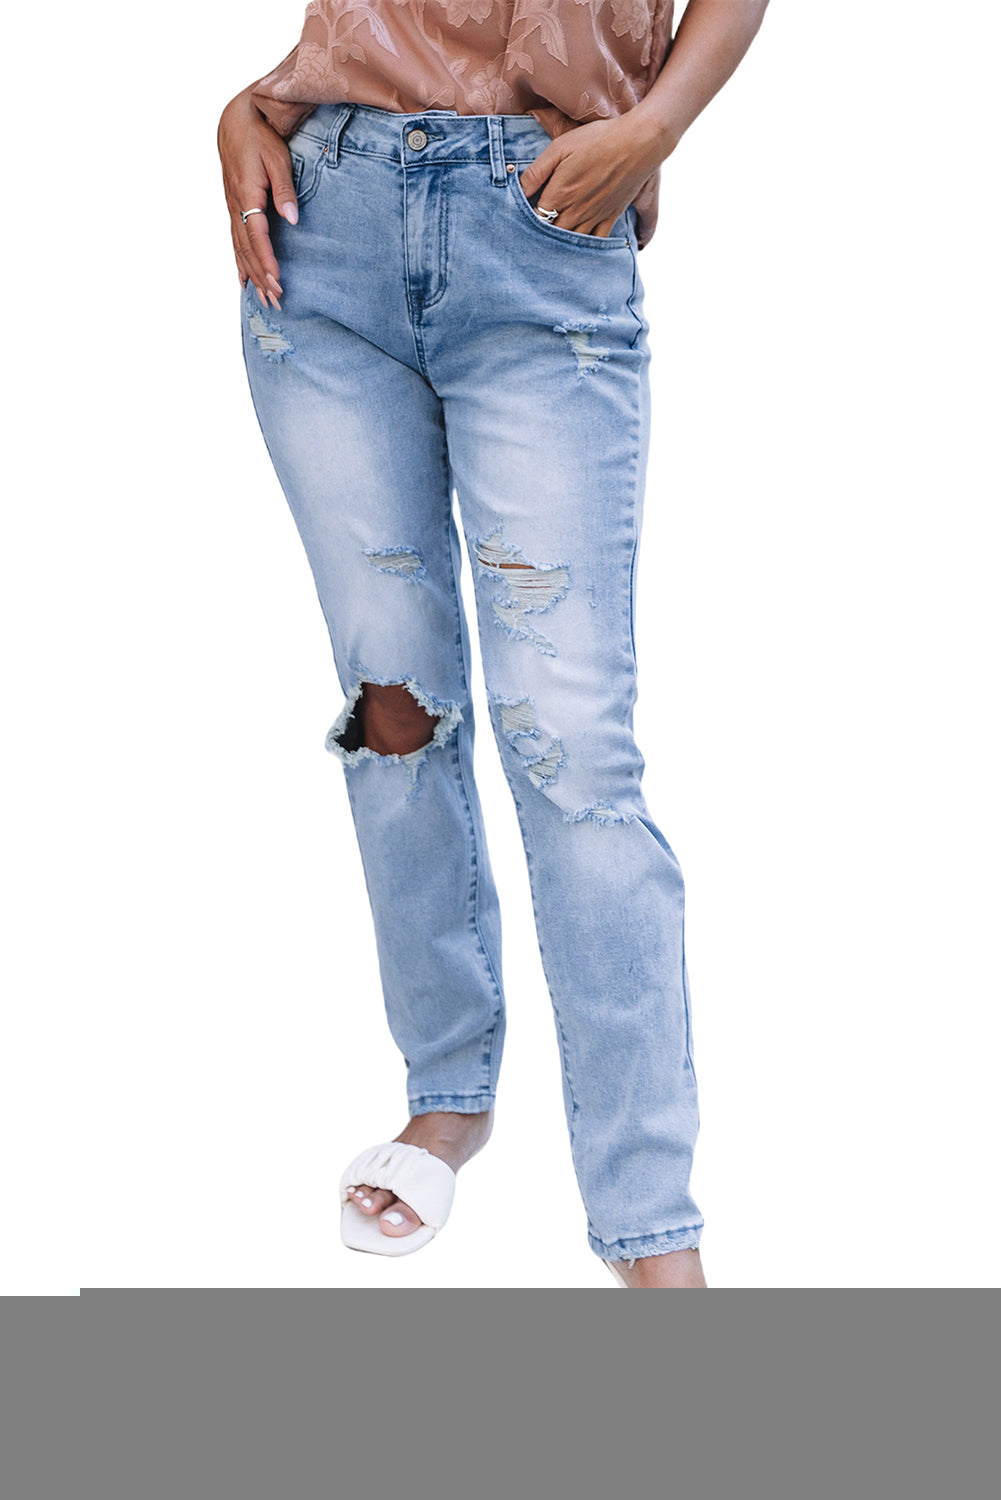 Light Blue Distressed Holes Straight Jeans